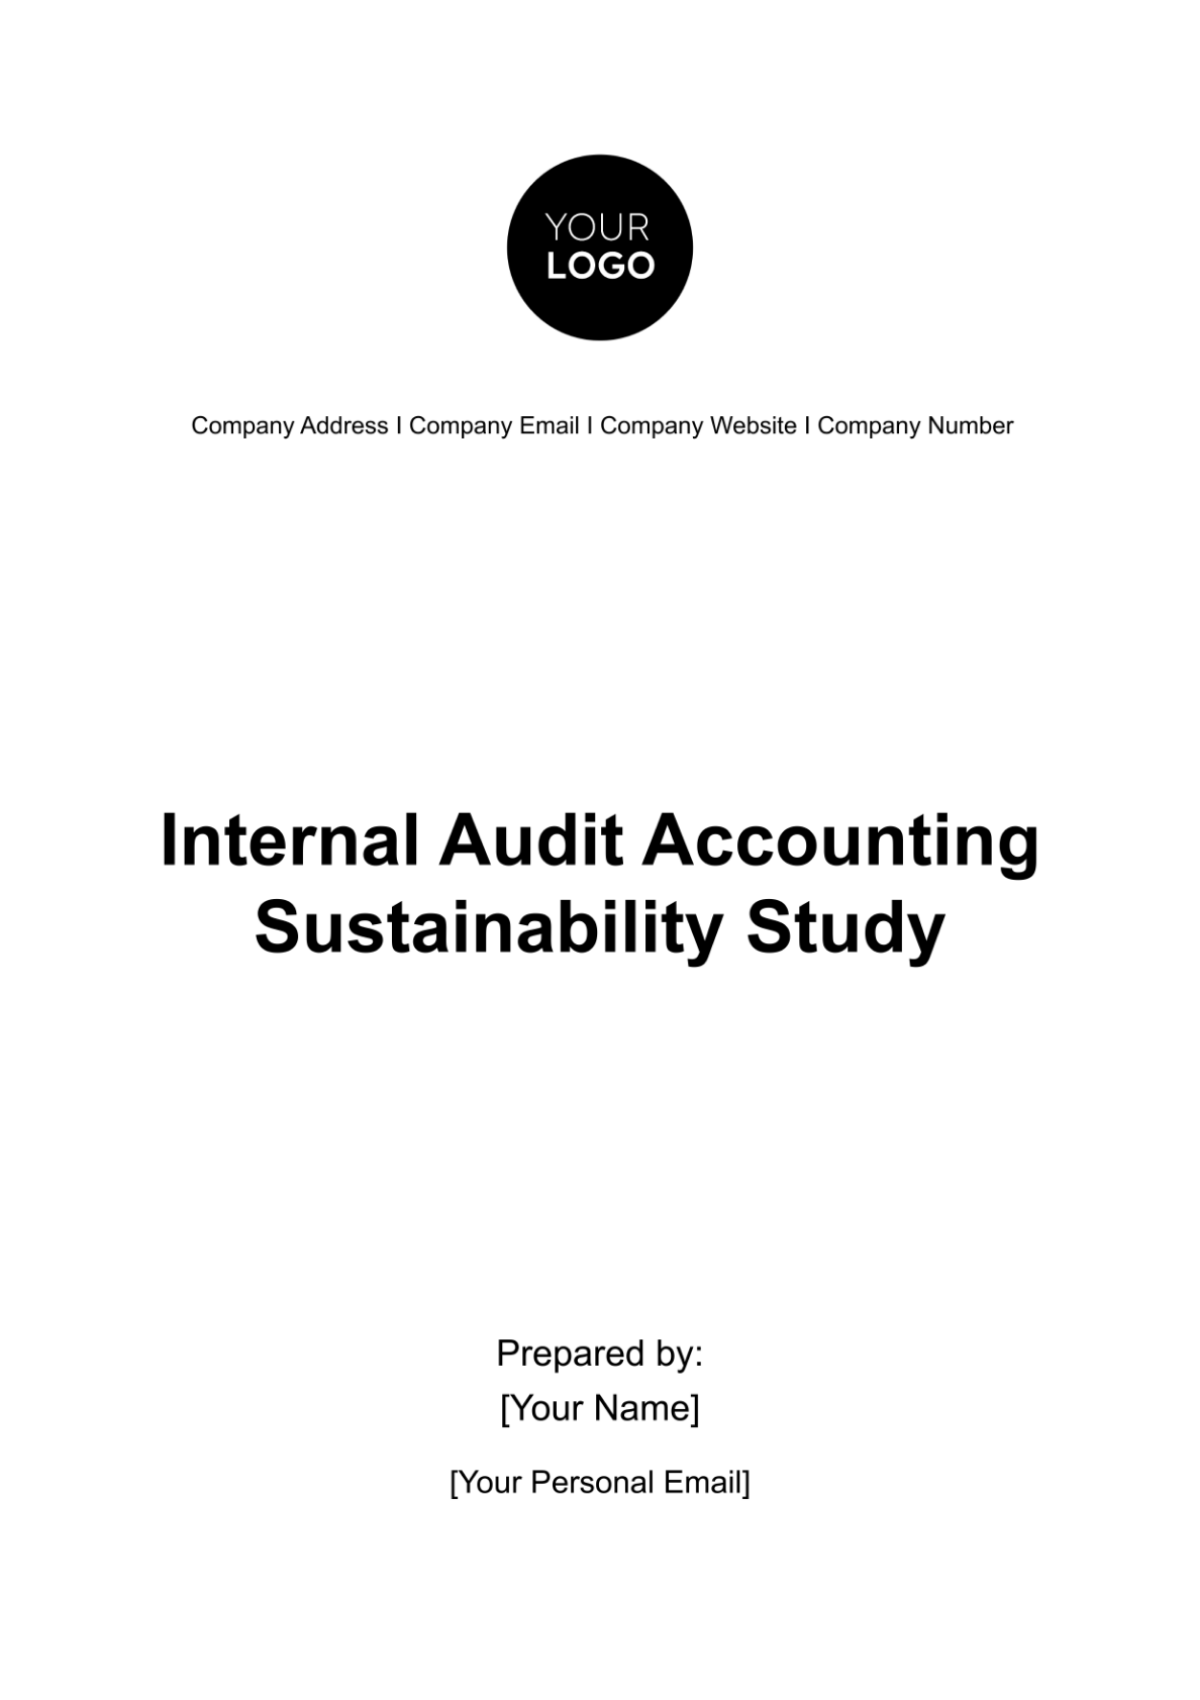 Internal Audit Accounting Sustainability Study Template